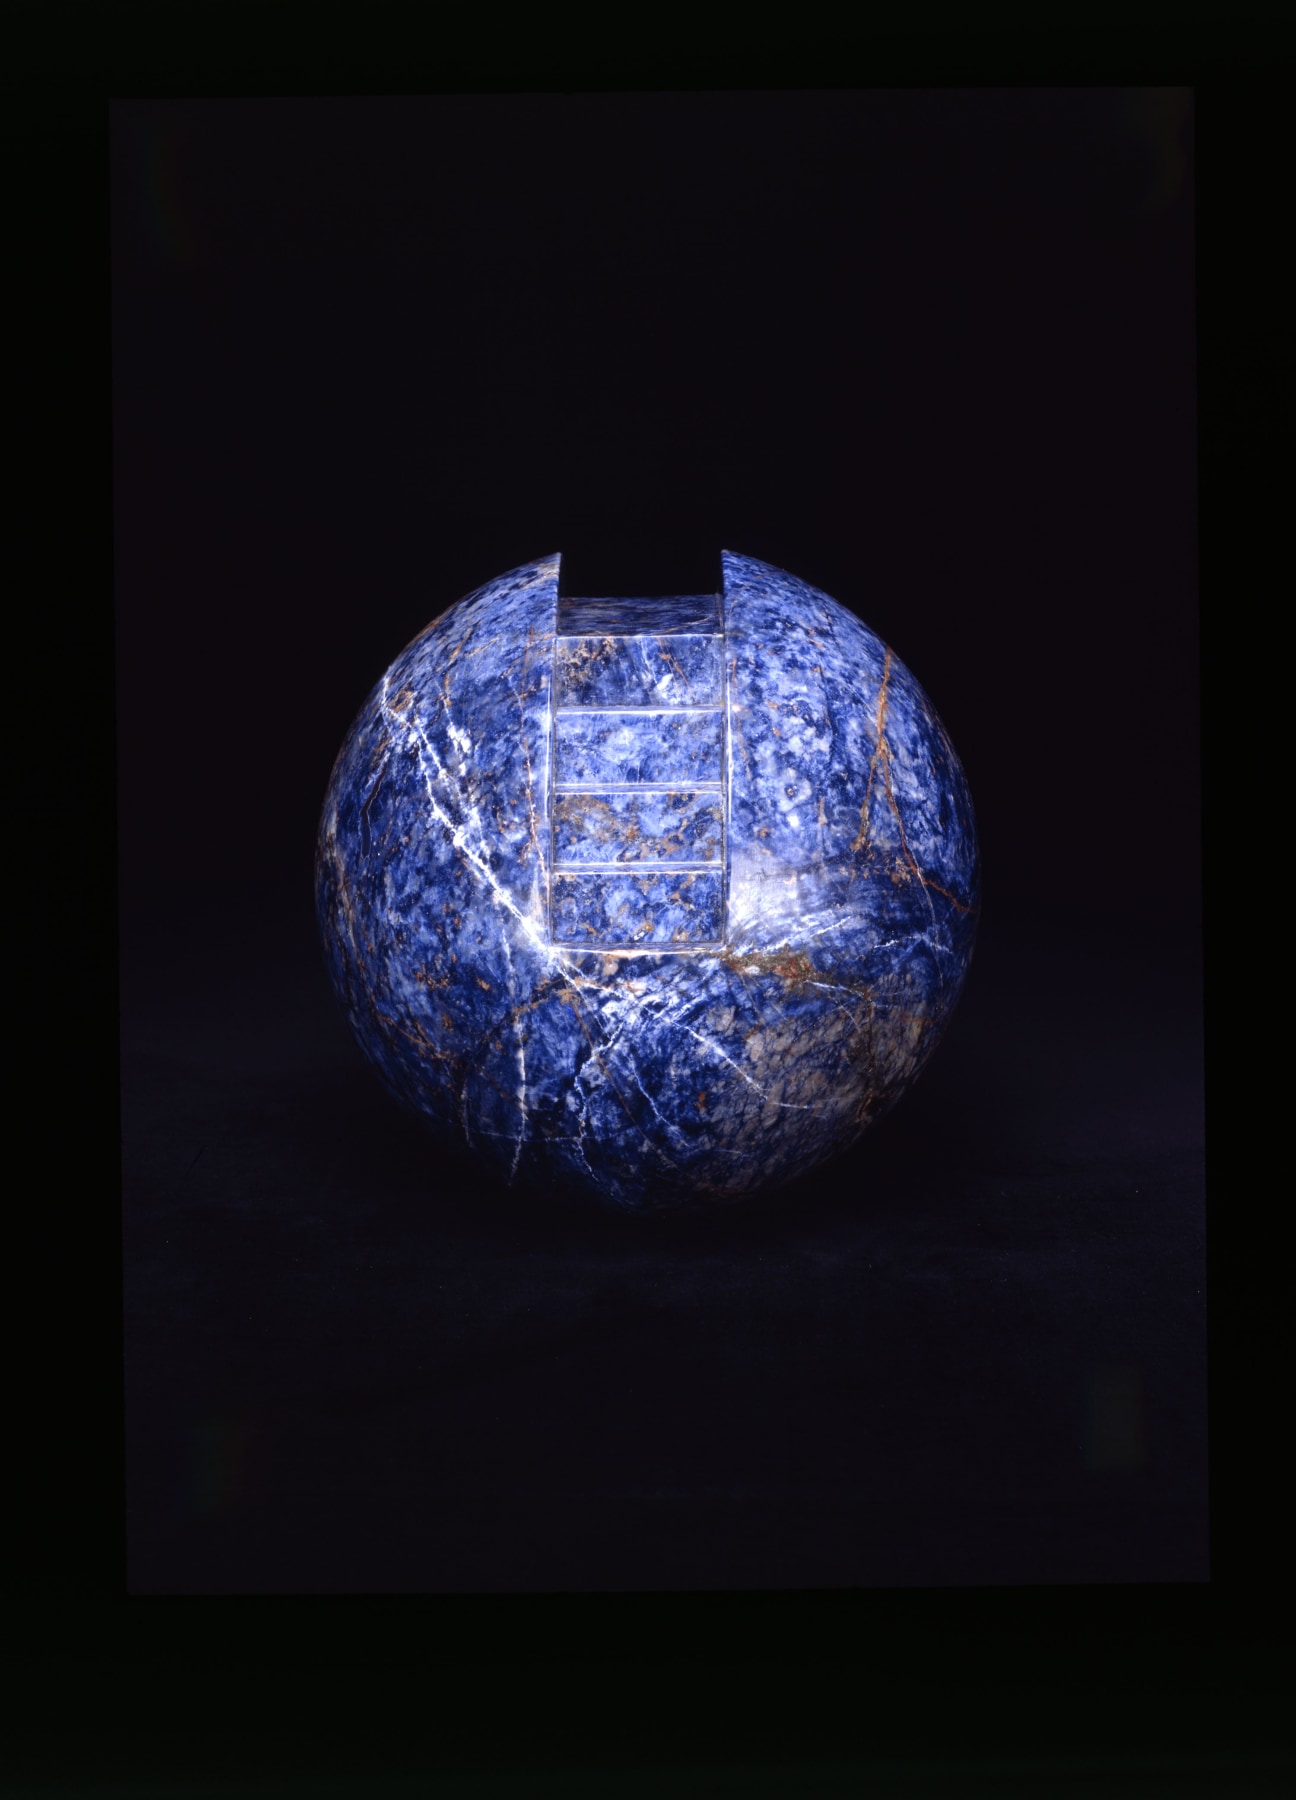 James Lee Byars, The Sphere with Stairs, 1989